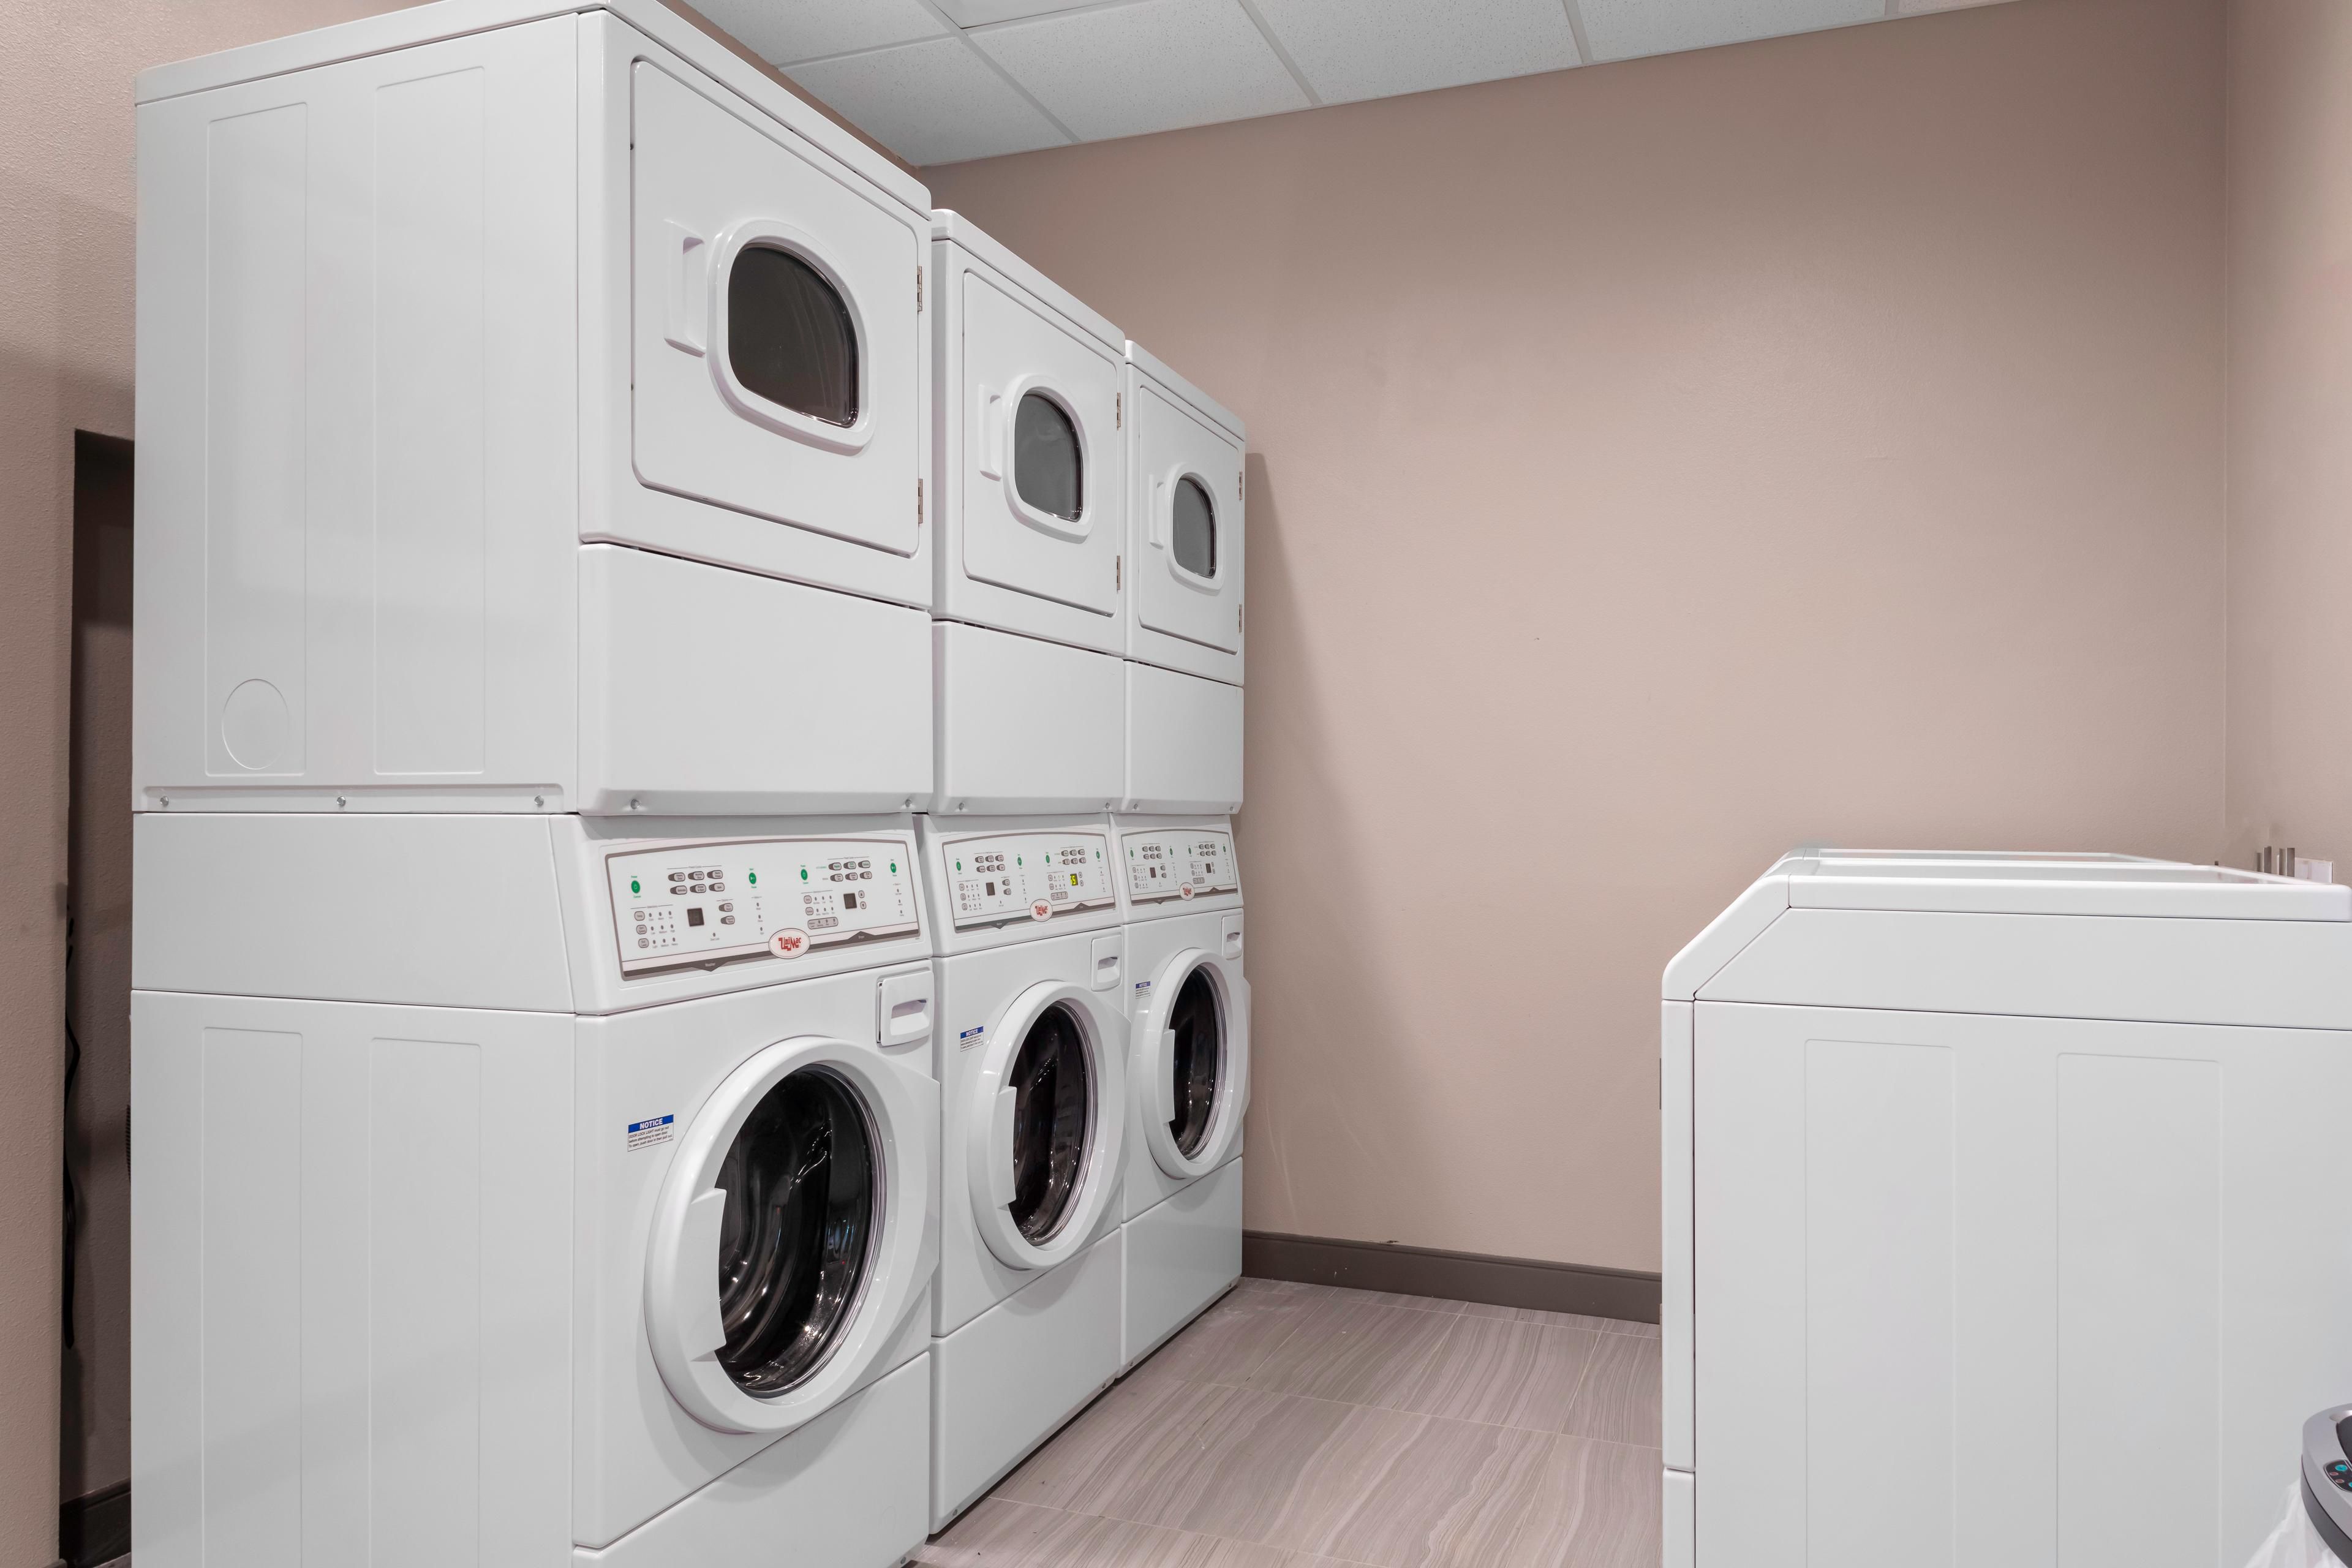 Be sure to take advantage of our complimentary guest laundry. Guests are welcome to use their own detergent, or it can be purchased at the front desk.